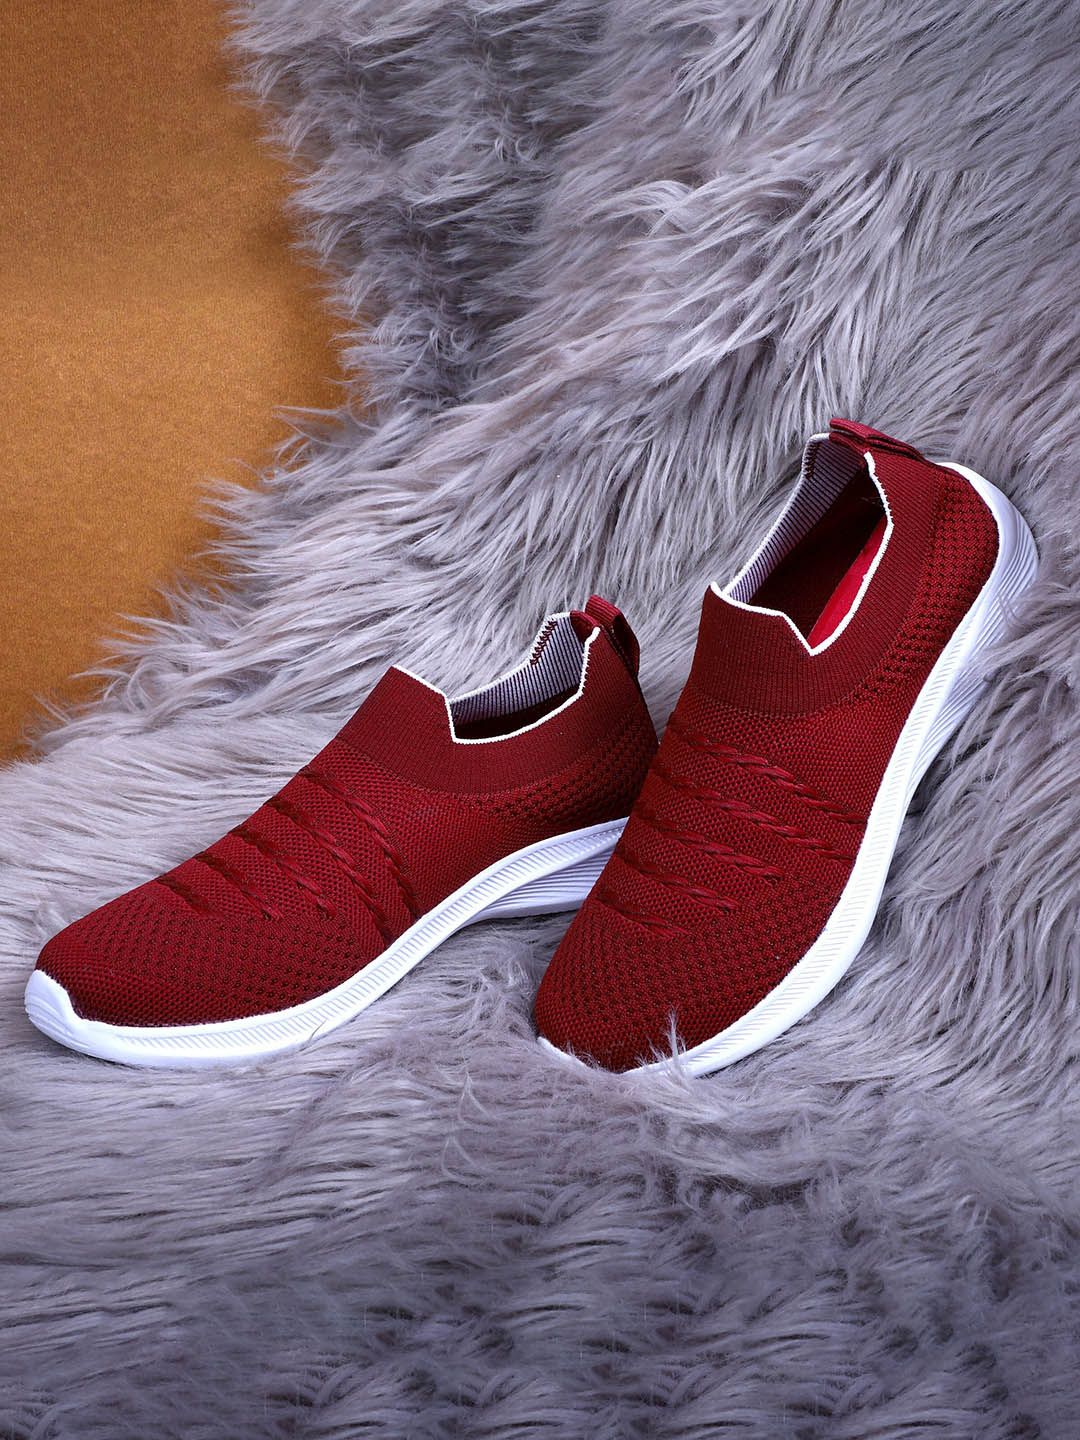 TPENT Women Maroon Mesh Running Non-Marking Sports Shoes Price in India